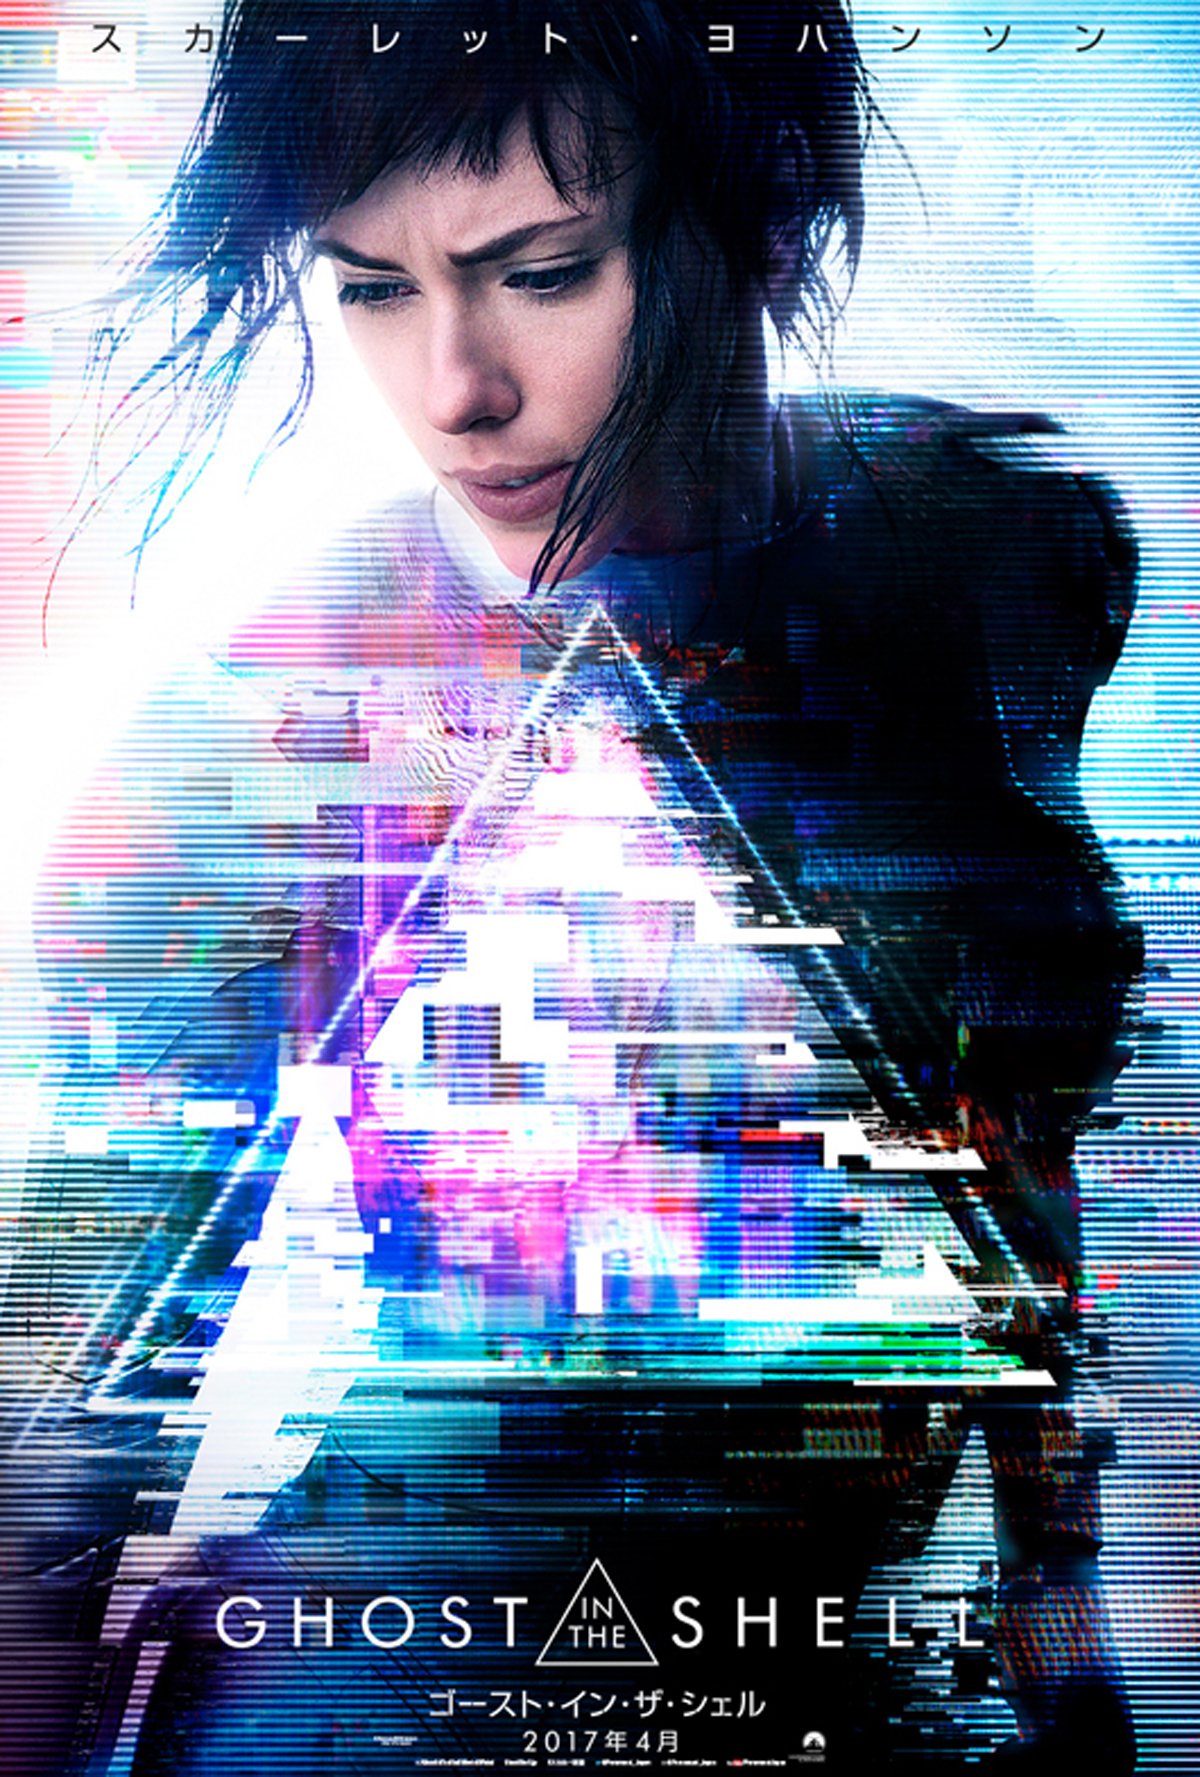 GHOST IN THE SHELL 映画